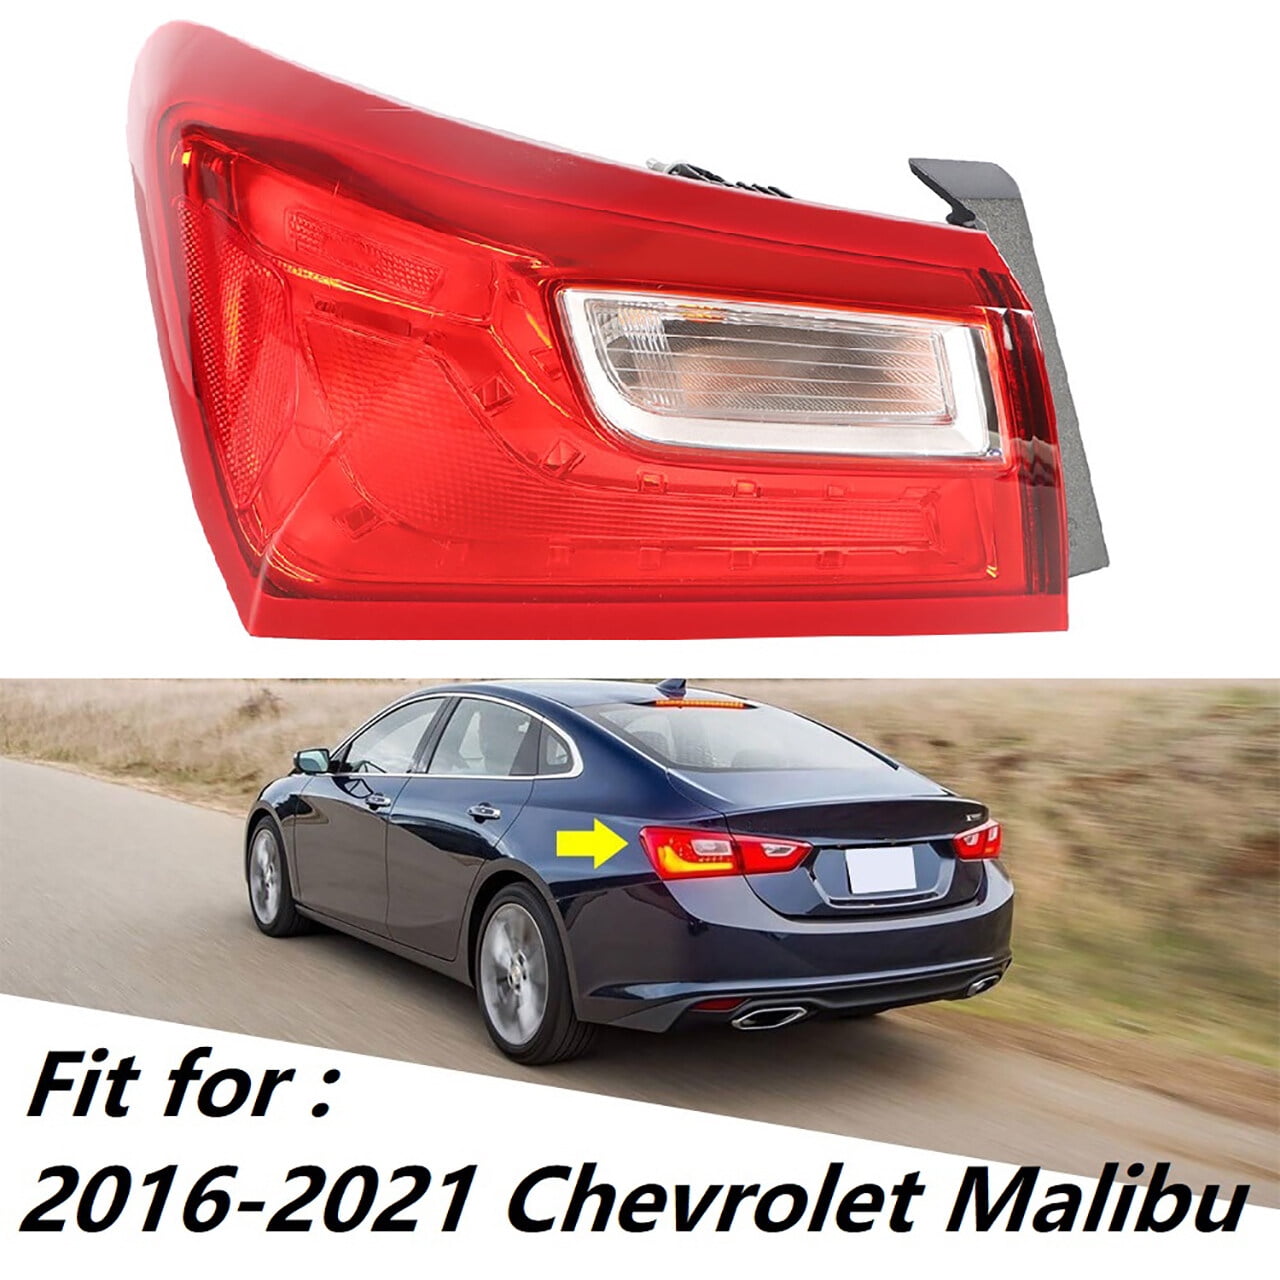 Rear Tail Light Lamp Housing Assembly Fit for Chevrolet Malibu